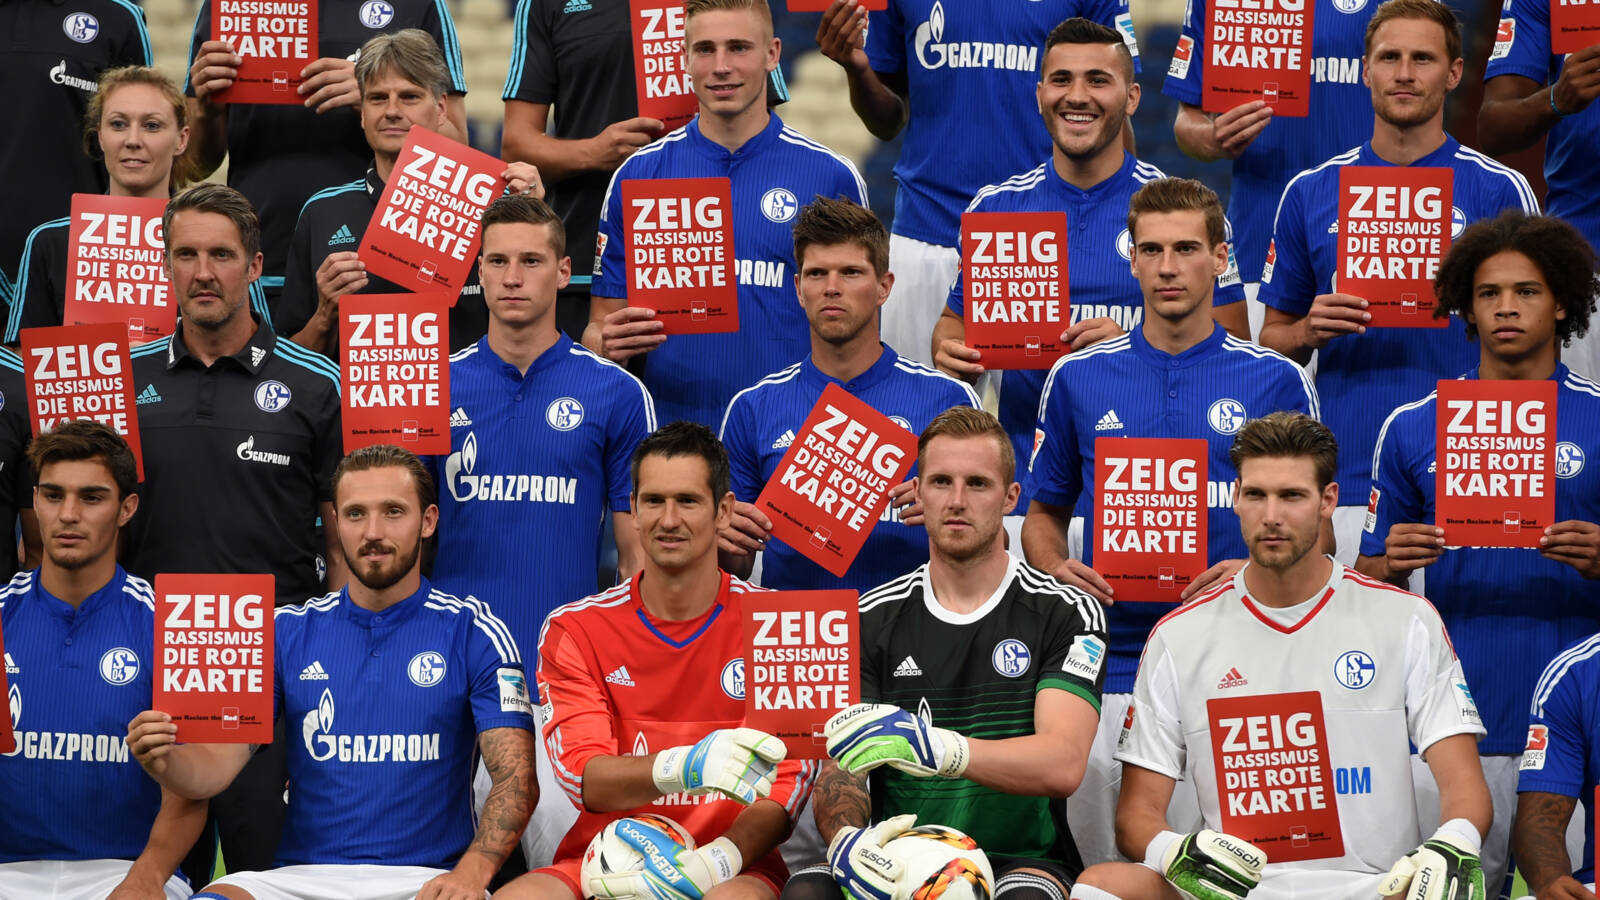 The Schalke team in 2015, with Show racism the red card signs